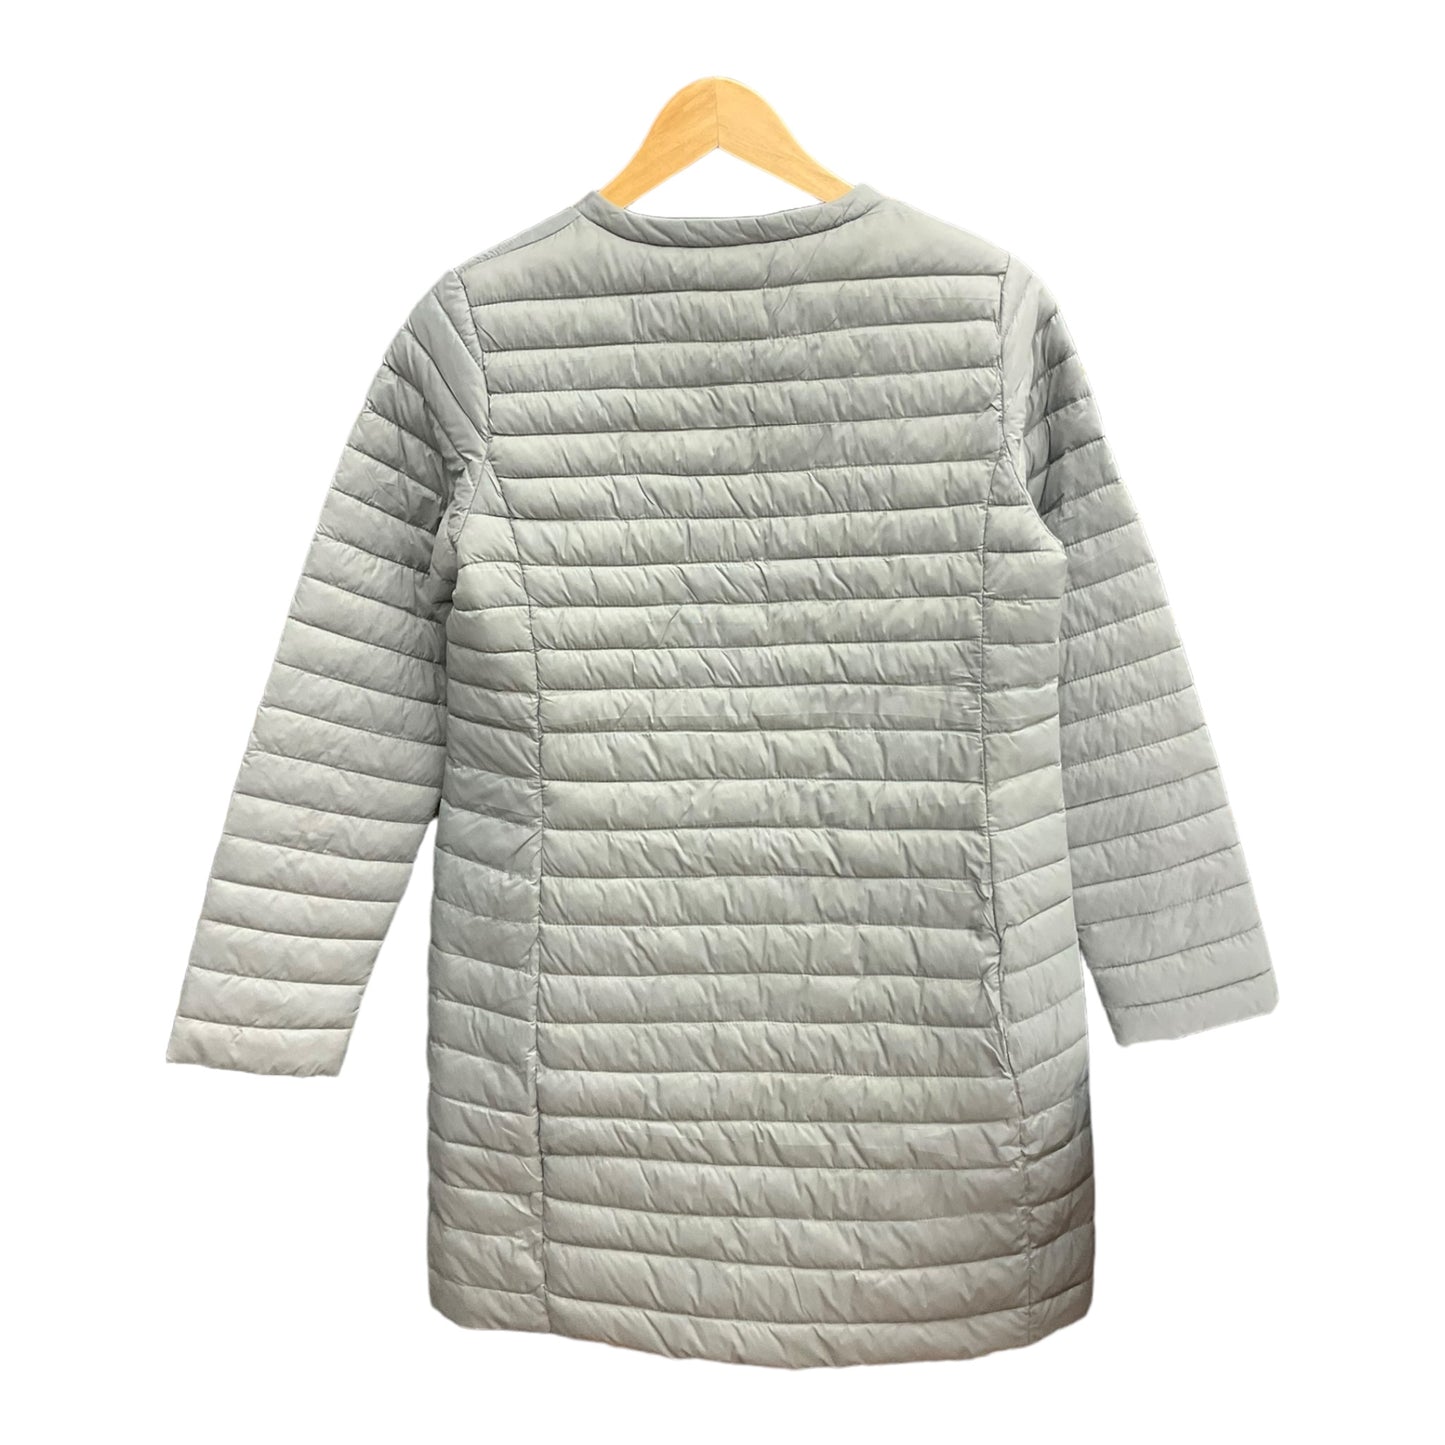 Coat Puffer & Quilted By Clothes Mentor  Size: Xs